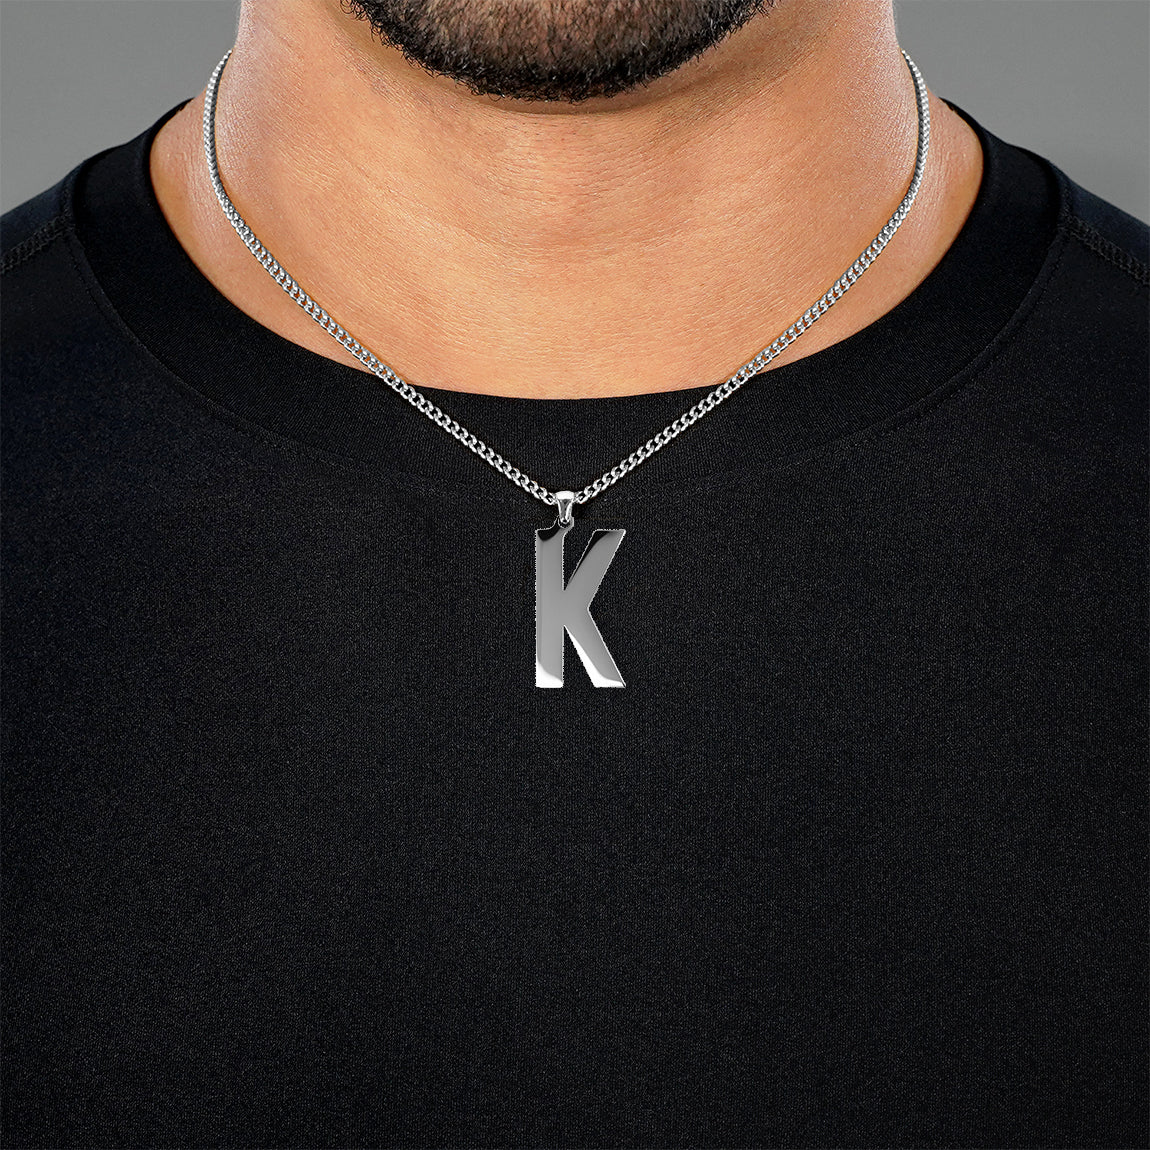 K Letter Pendant with Chain Necklace - Stainless Steel